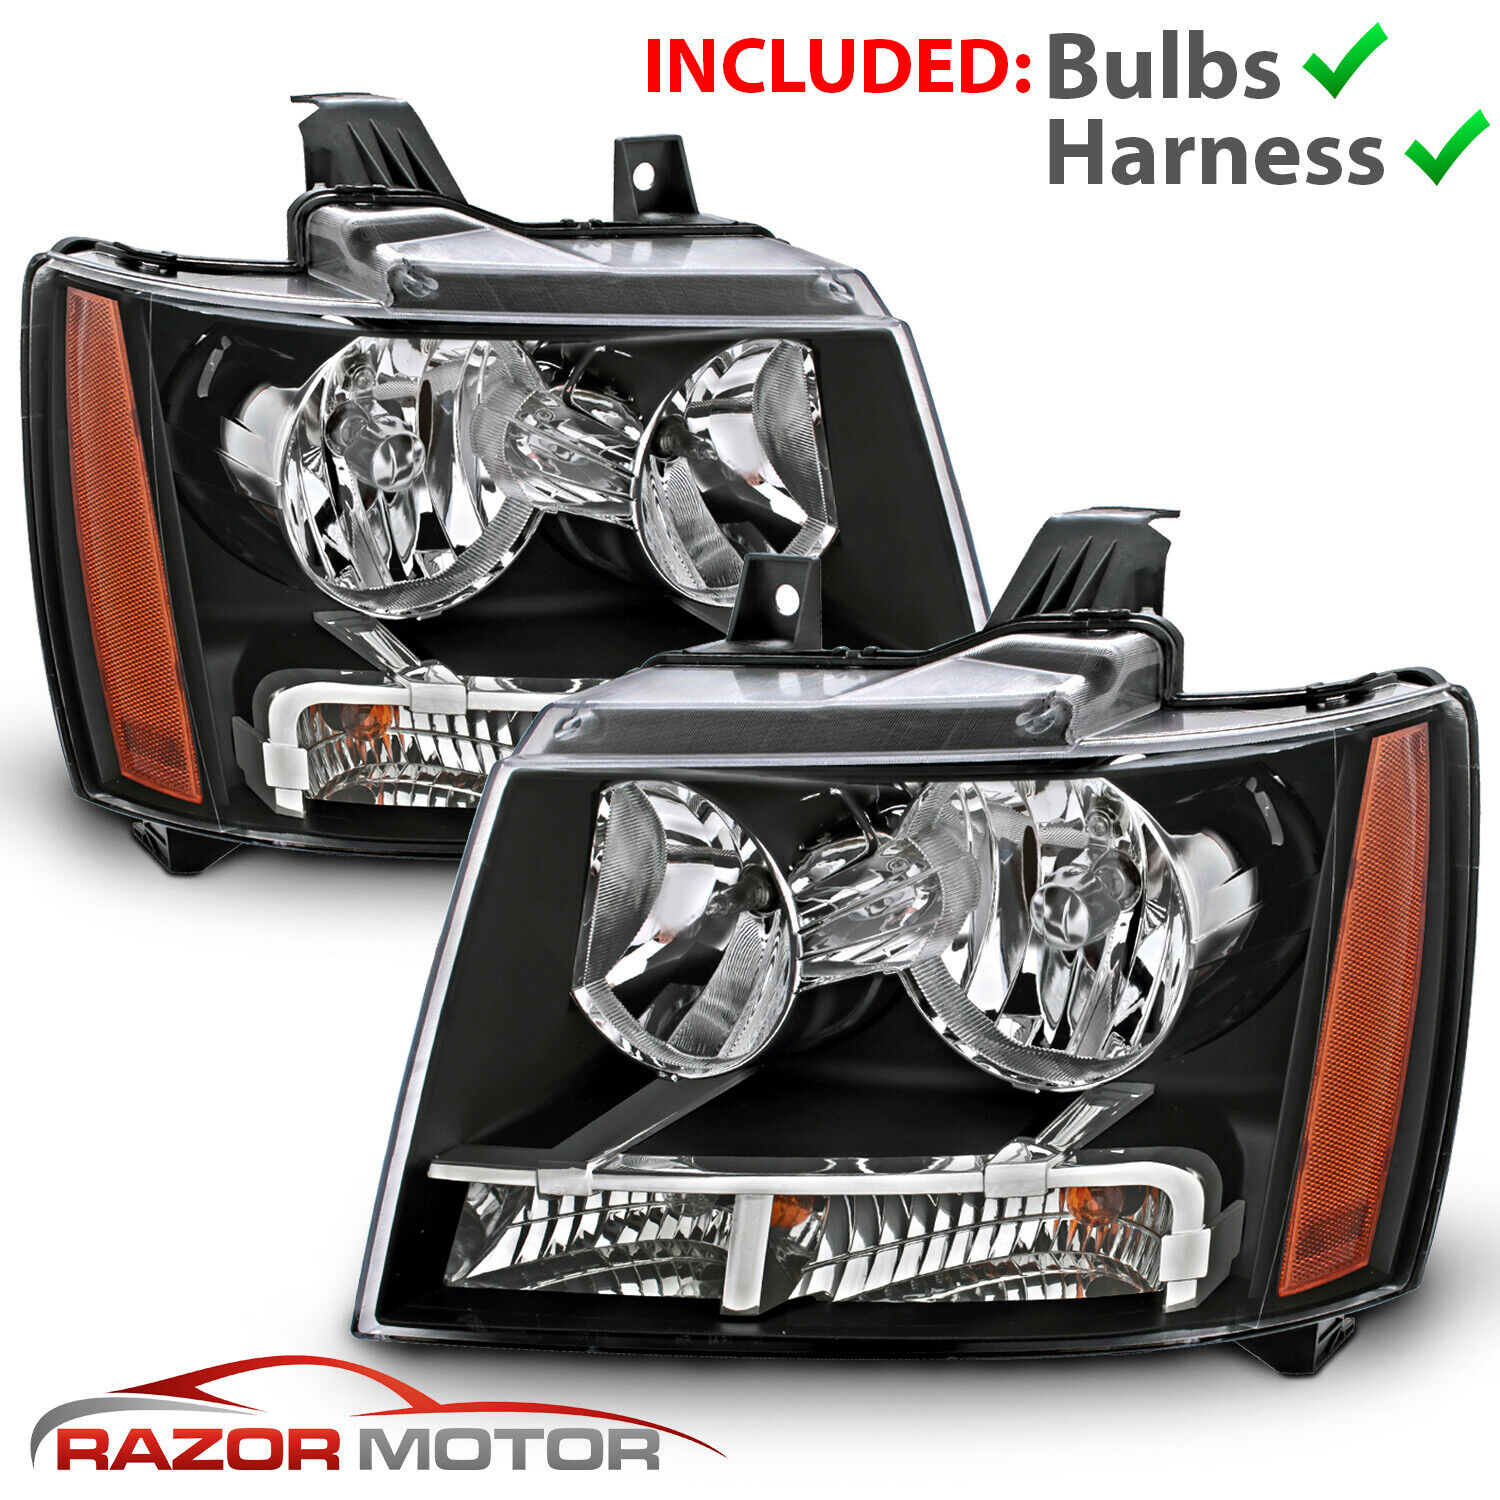 2007-14 Replacement Black Headlight Pair for Chevy Avalanche Suburban Tahoe